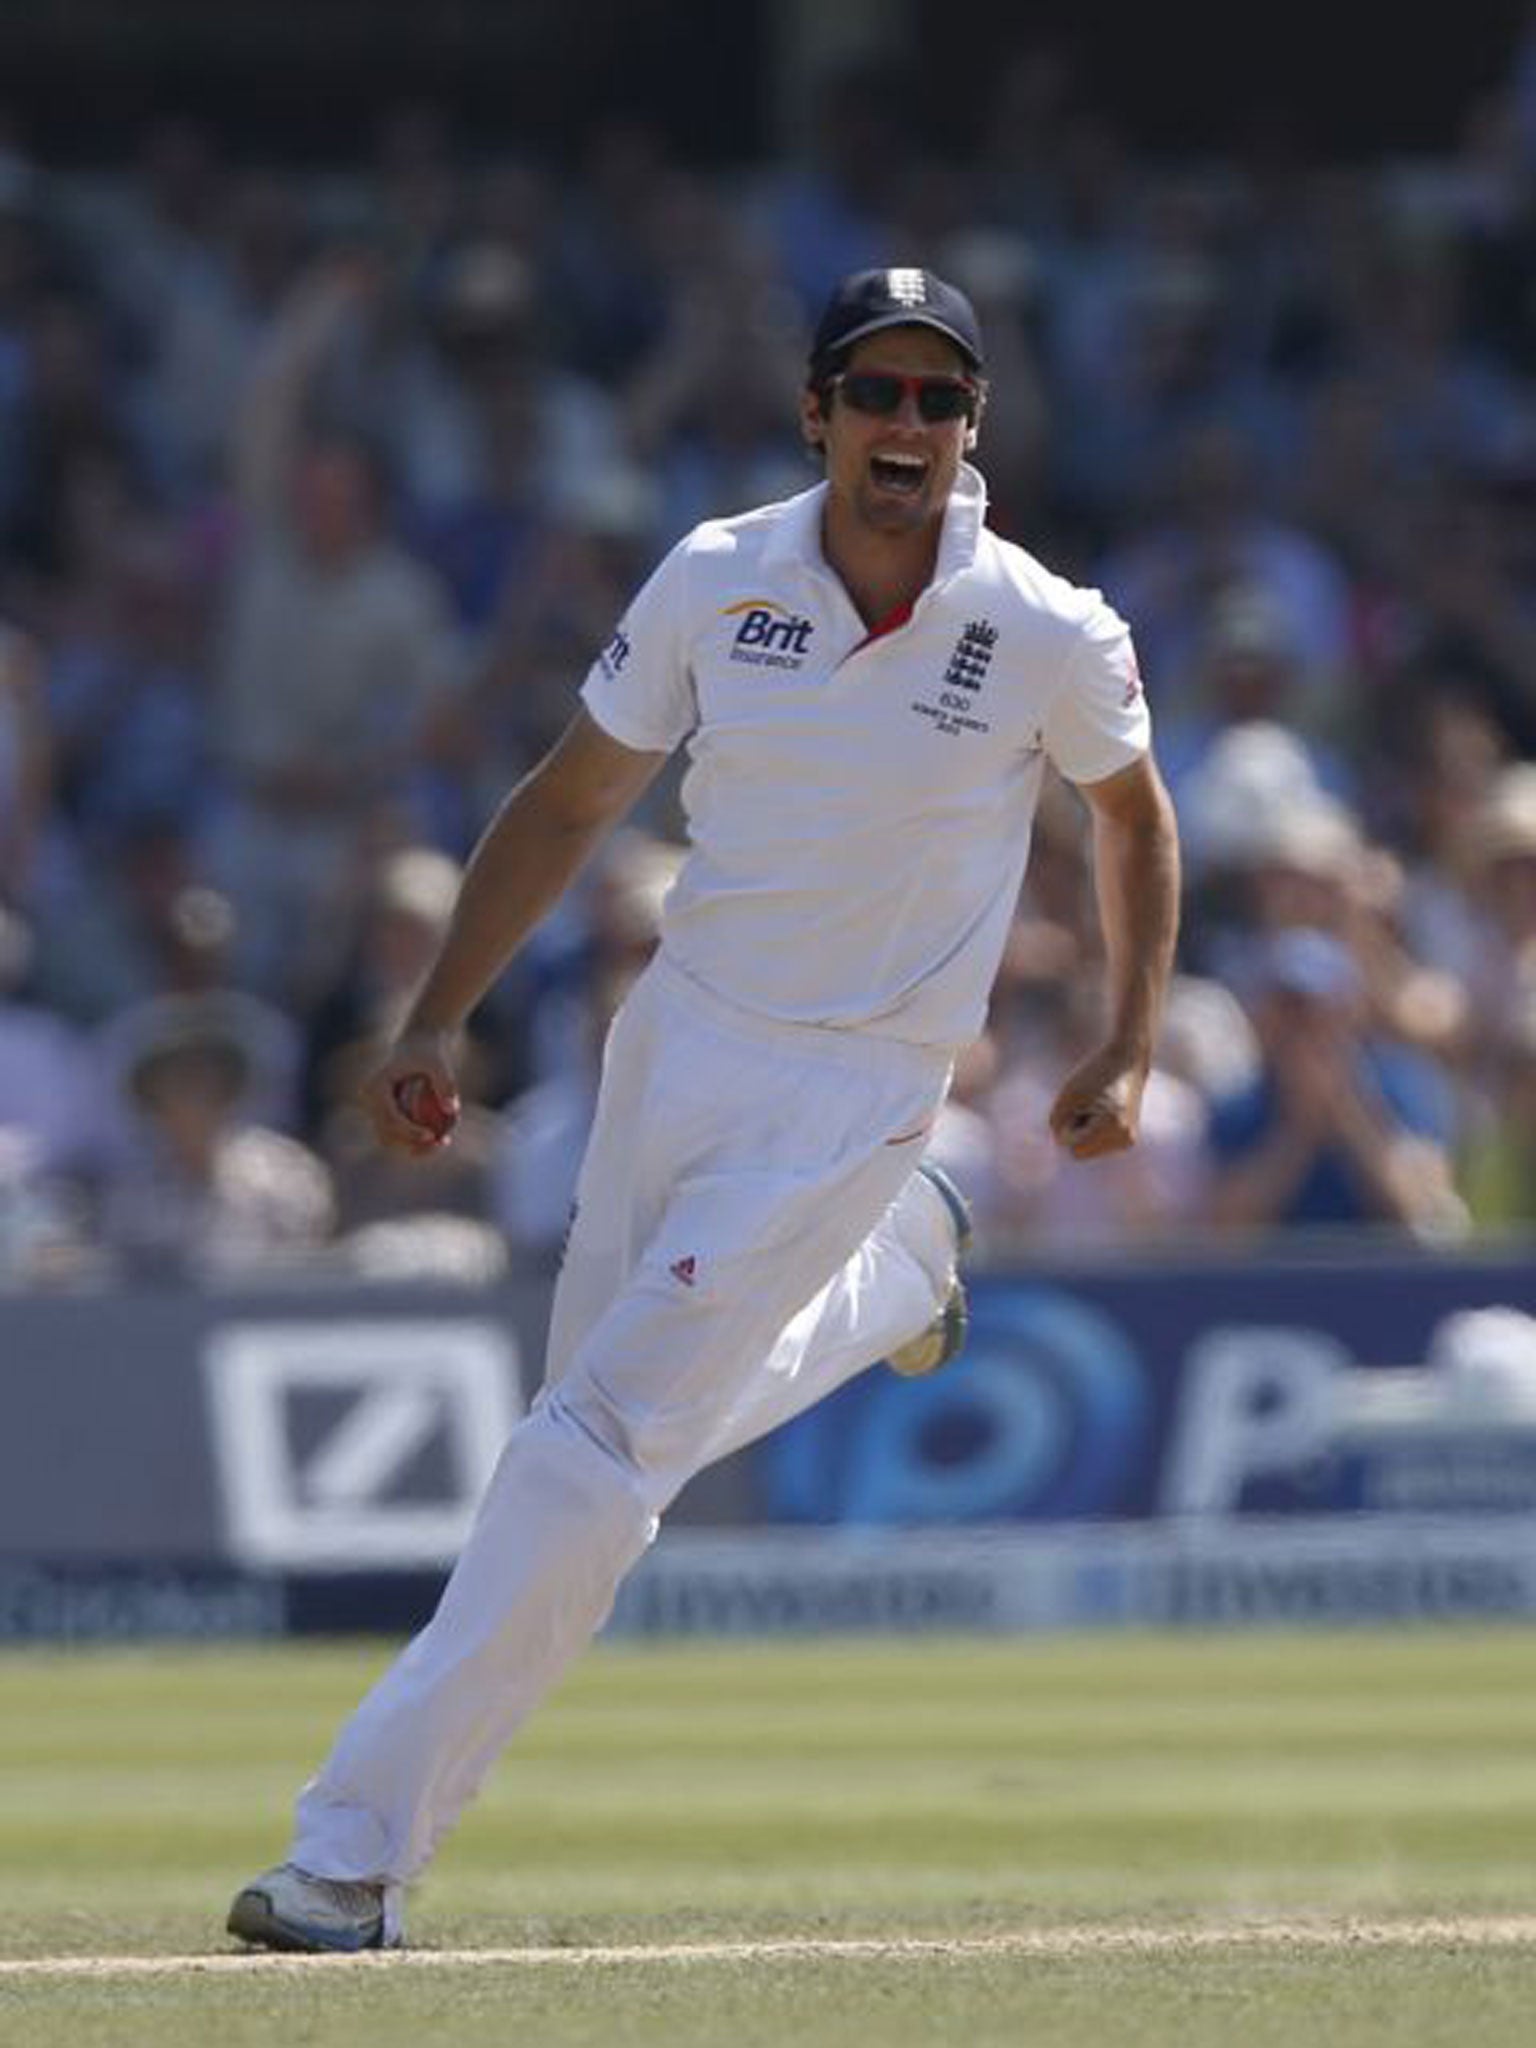 England captain Alastair Cook says that winning is a habit